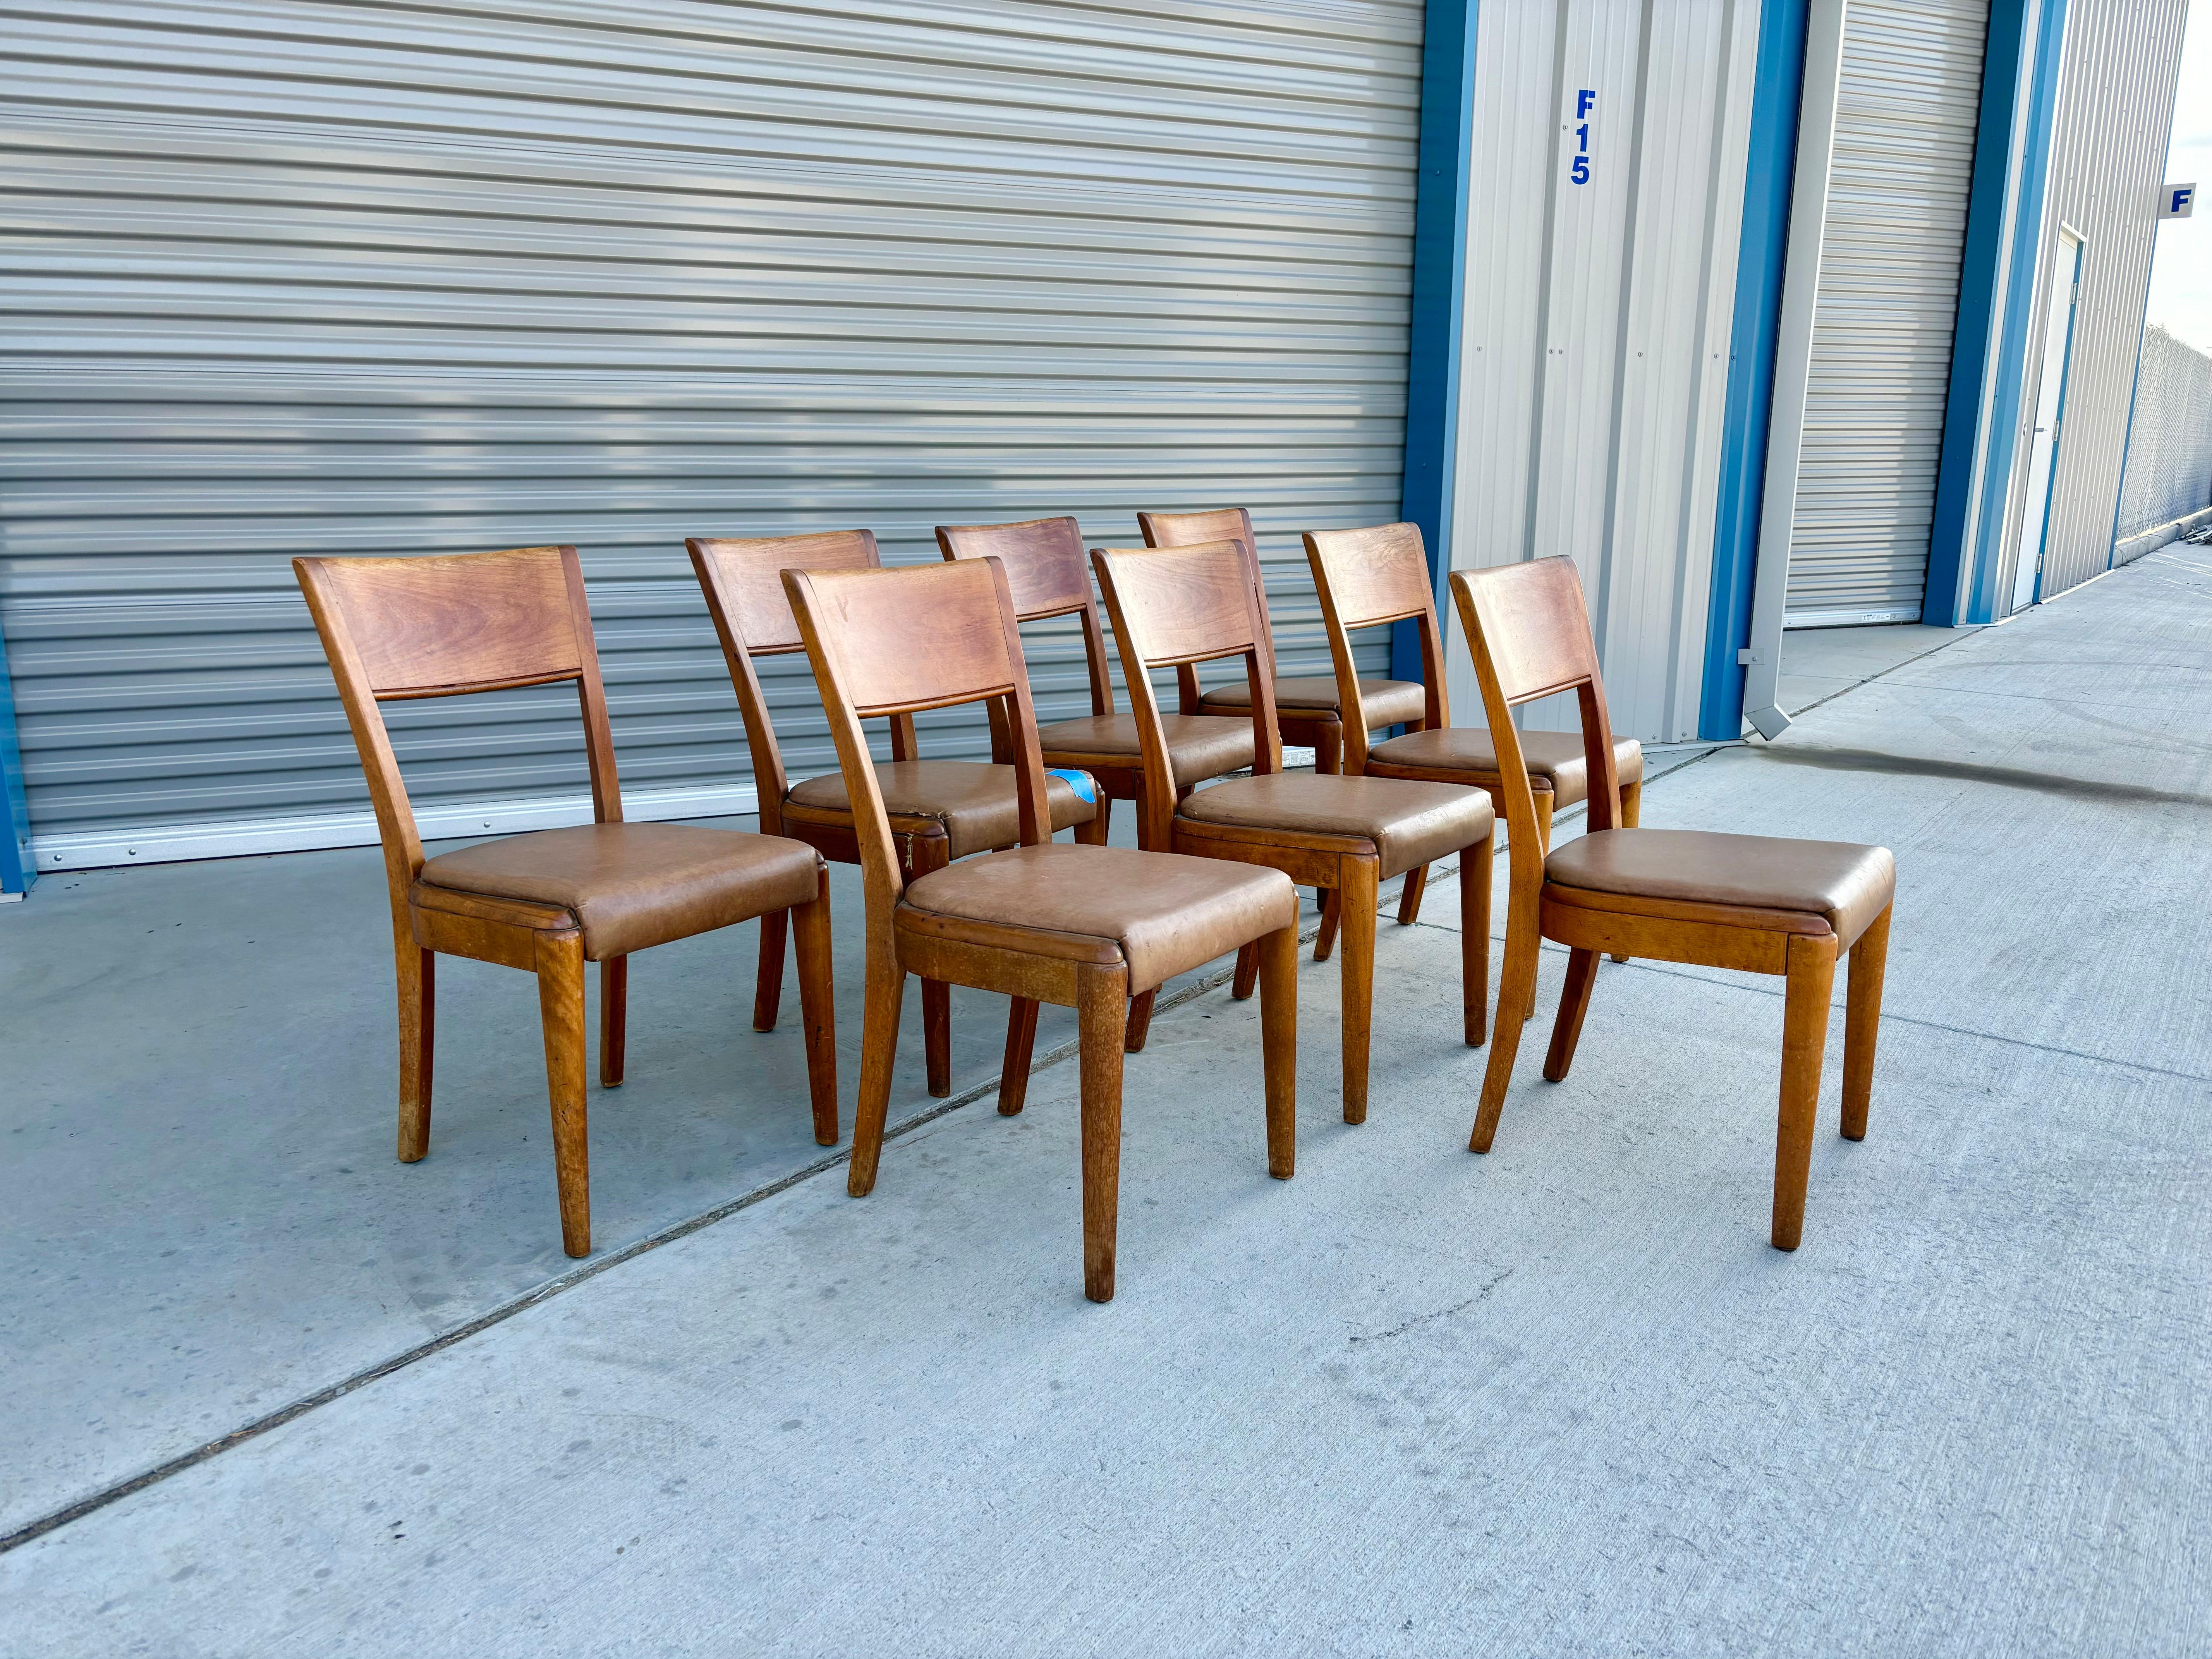 Mid-century maple dining chairs designed and manufactured by Heywood Wakefield in the United States circa 1960s. These chairs boast a sleek and timeless design, featuring a sturdy maple frame and a captivating brown vinyl upholstery that exudes